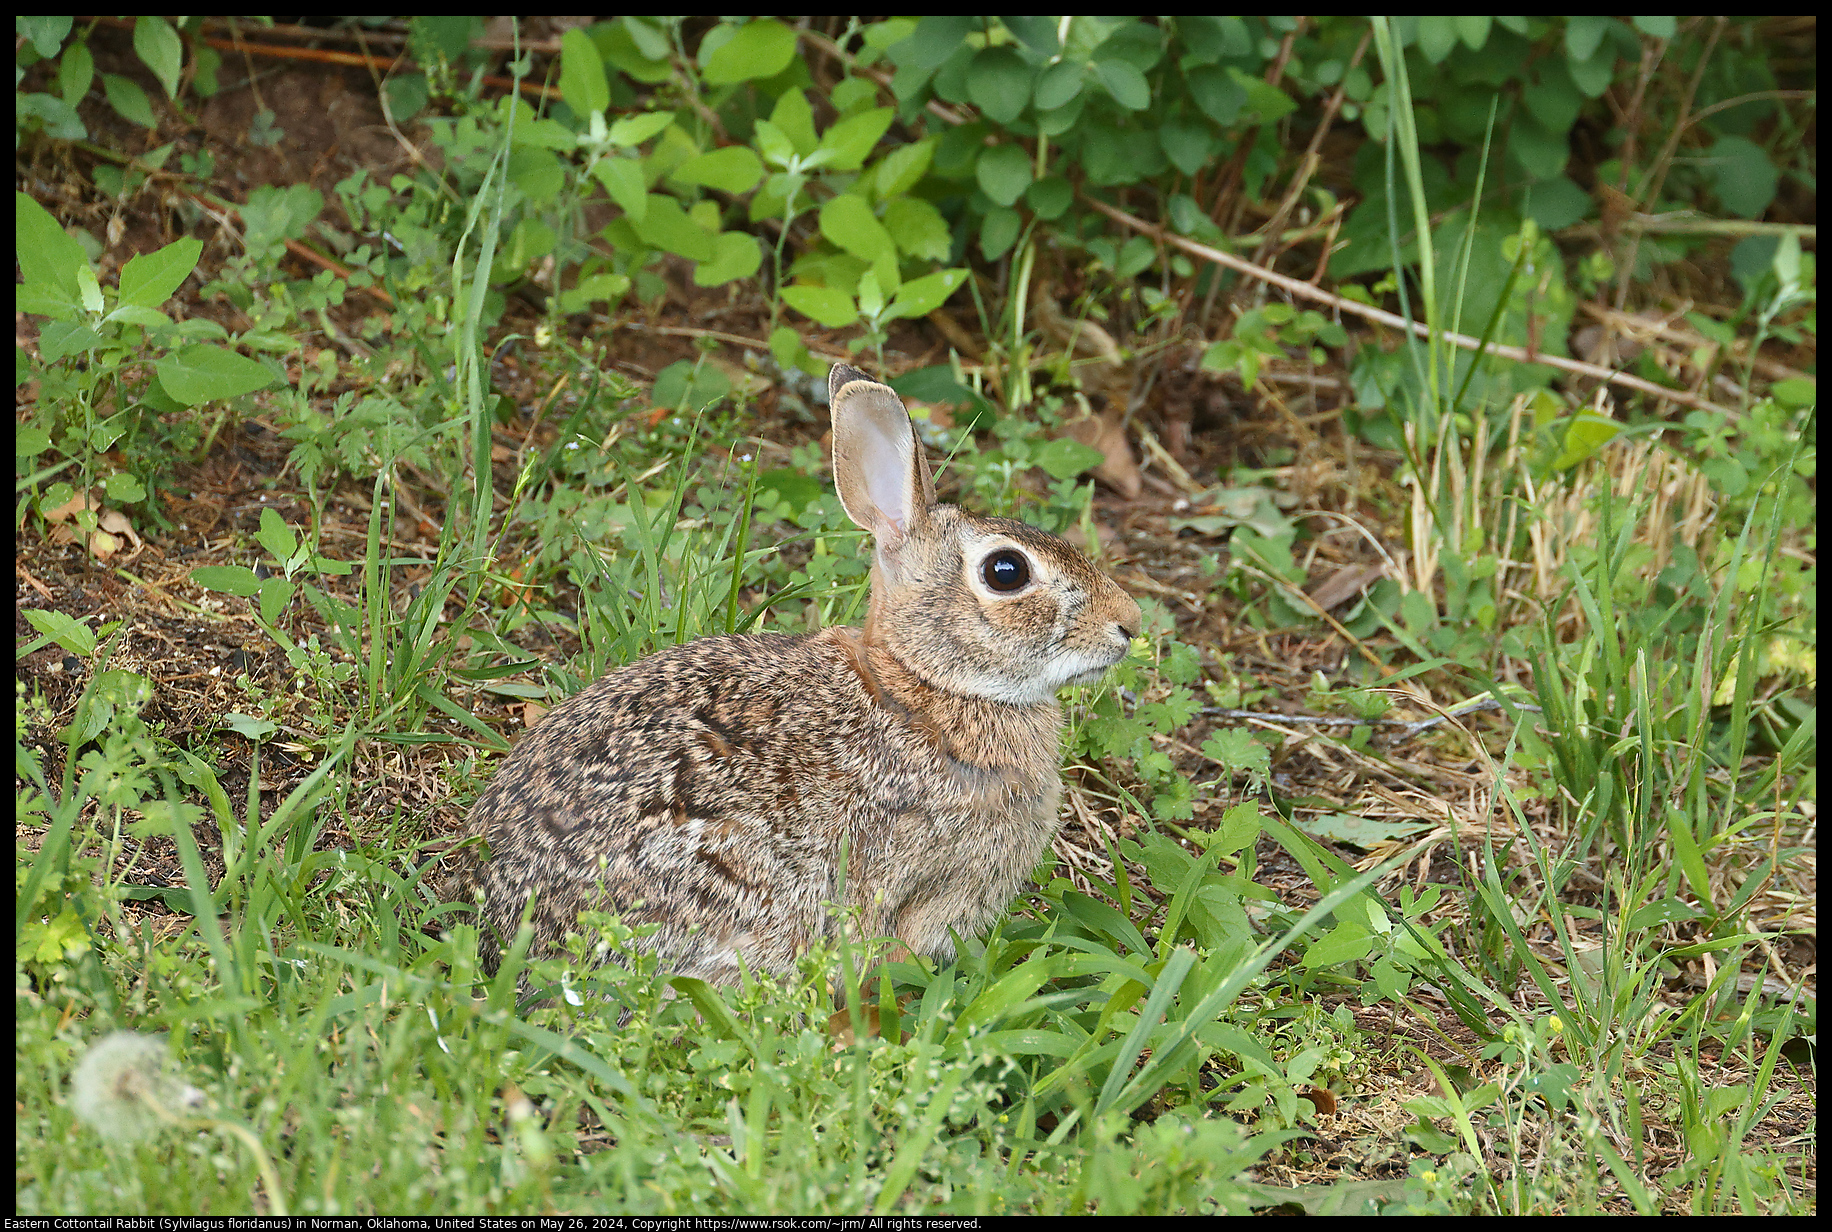 Eastern Cottontail Rabbit (Sylvilagus floridanus) in Norman, Oklahoma, United States on May 26, 2024